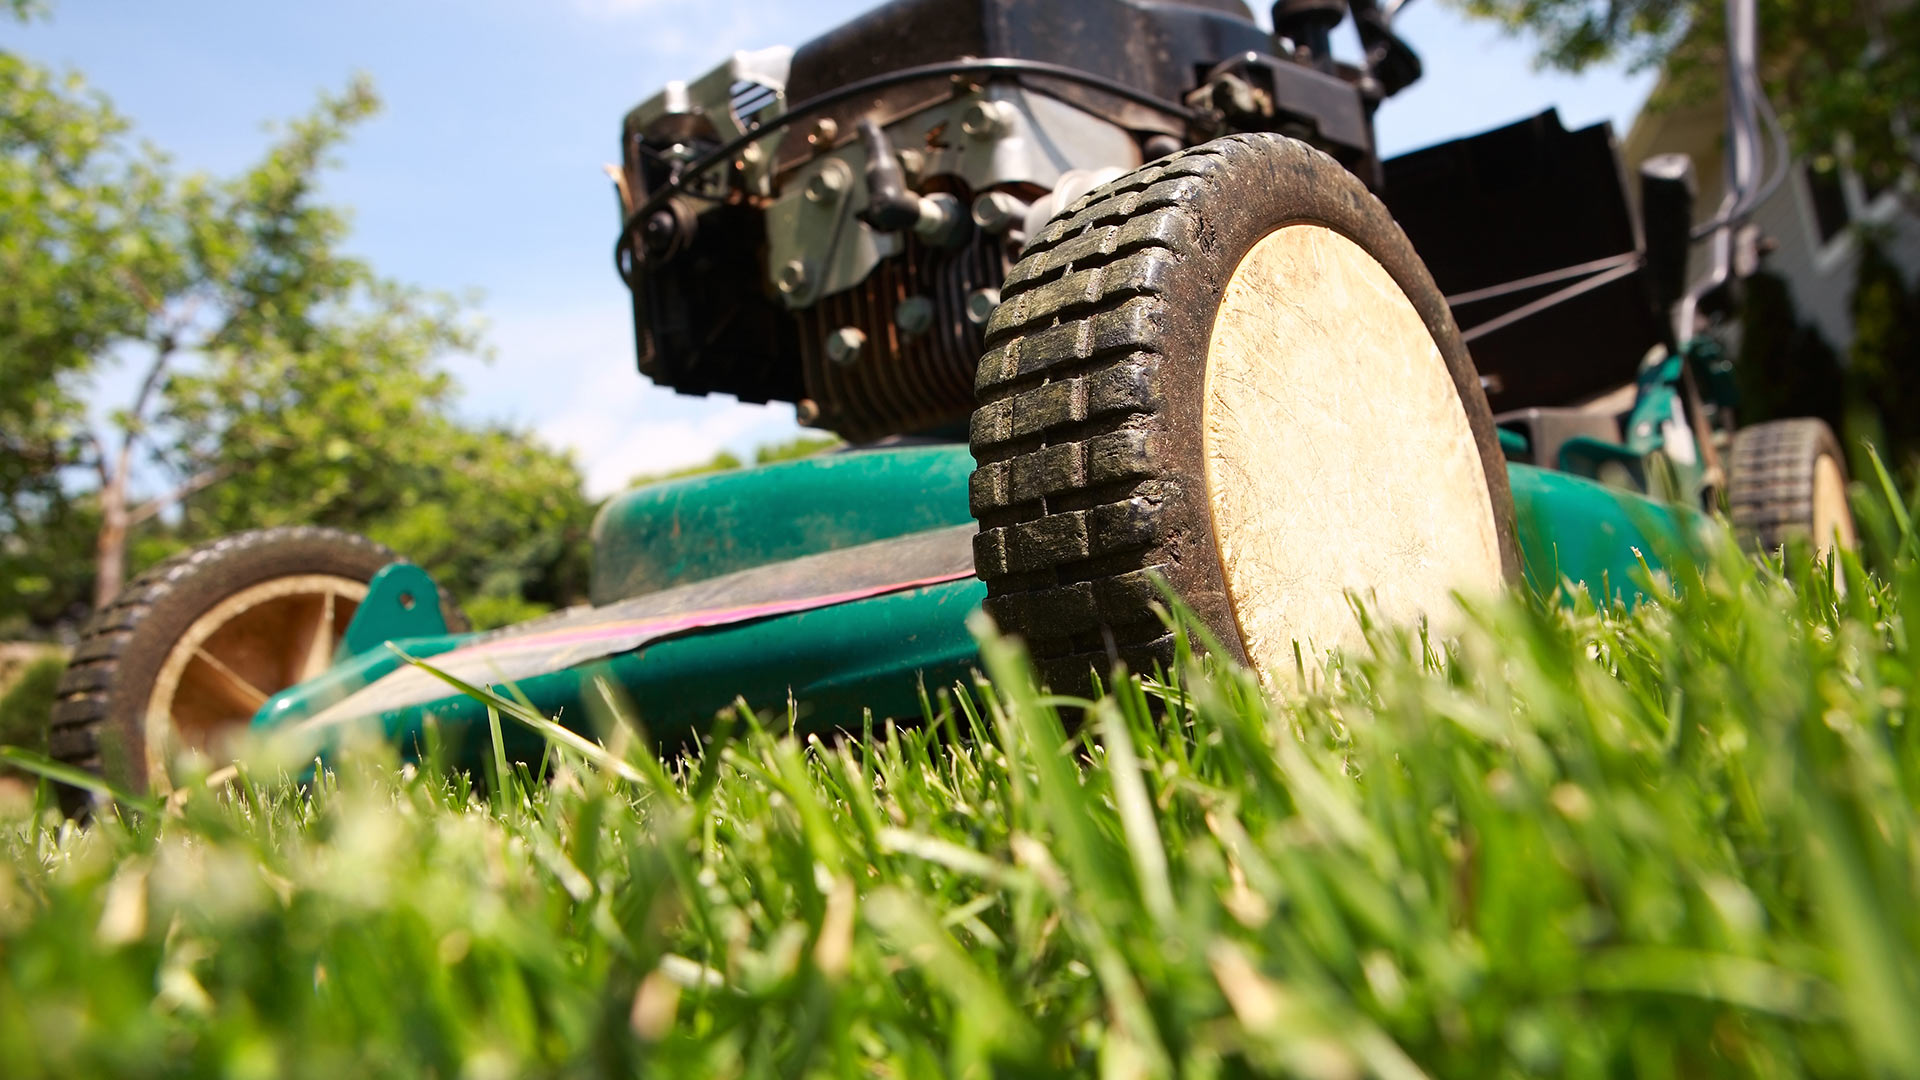 Mowing Your Sod for the First Time? Follow These 3 Rules